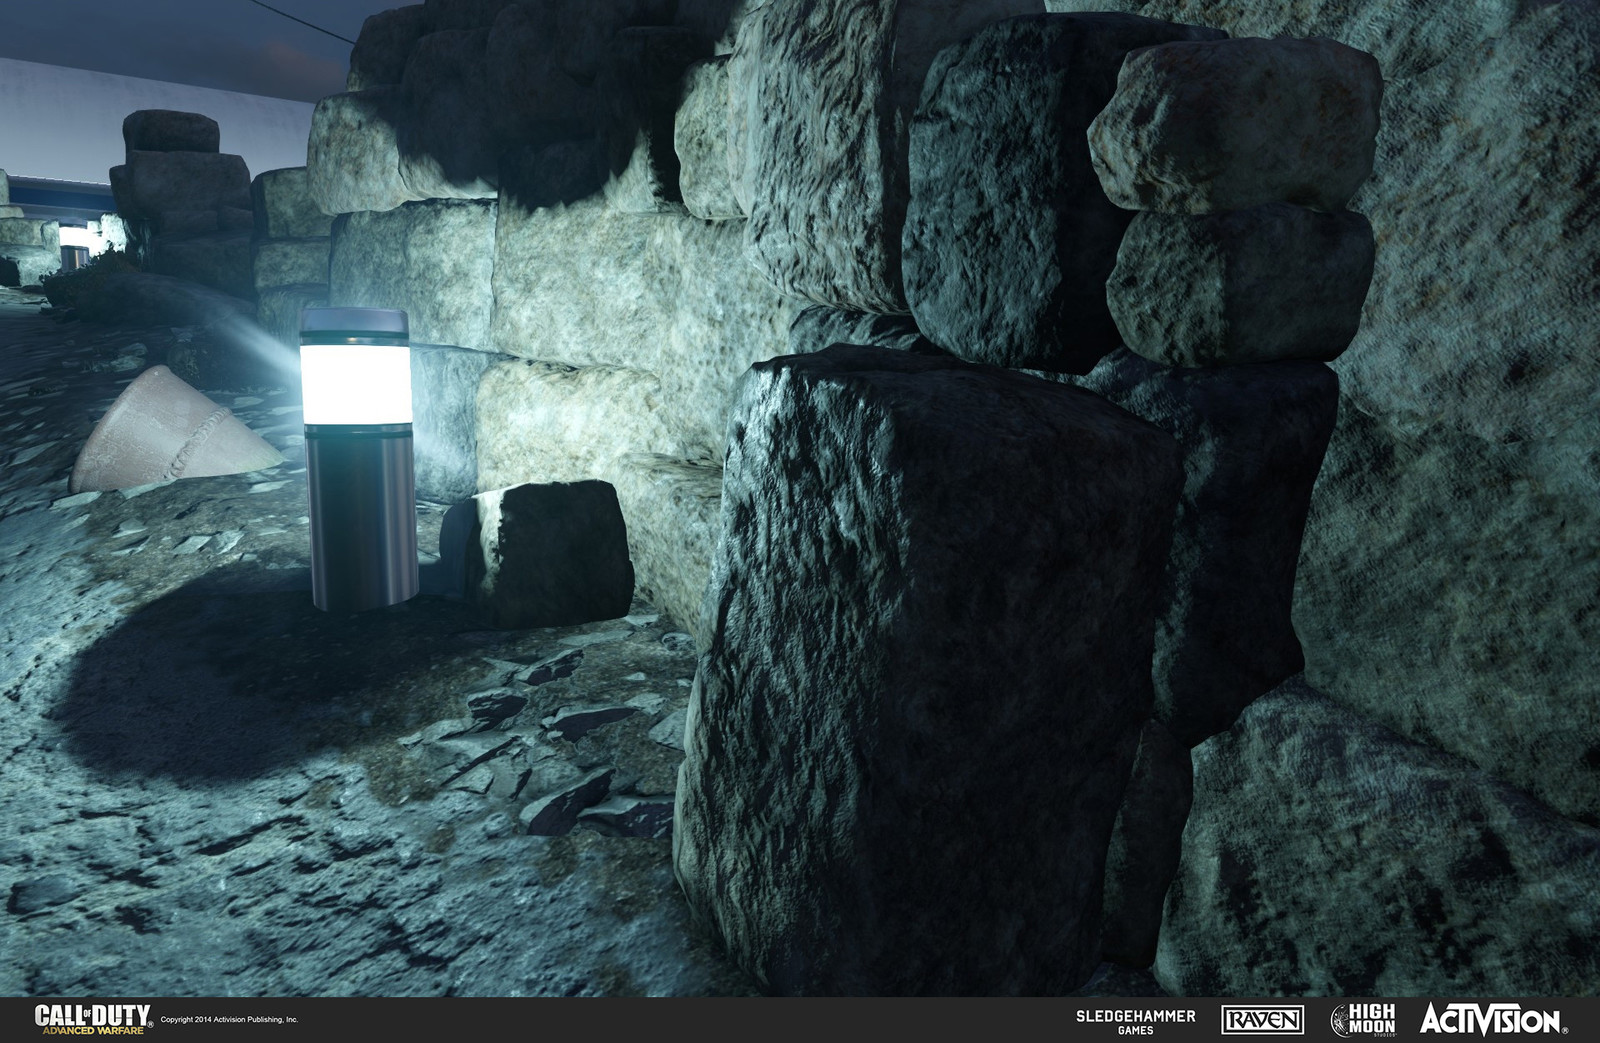 Created rock models and light canister in Terrace. The rocks were done in Z-Brush and the light canister in 3DSMax.